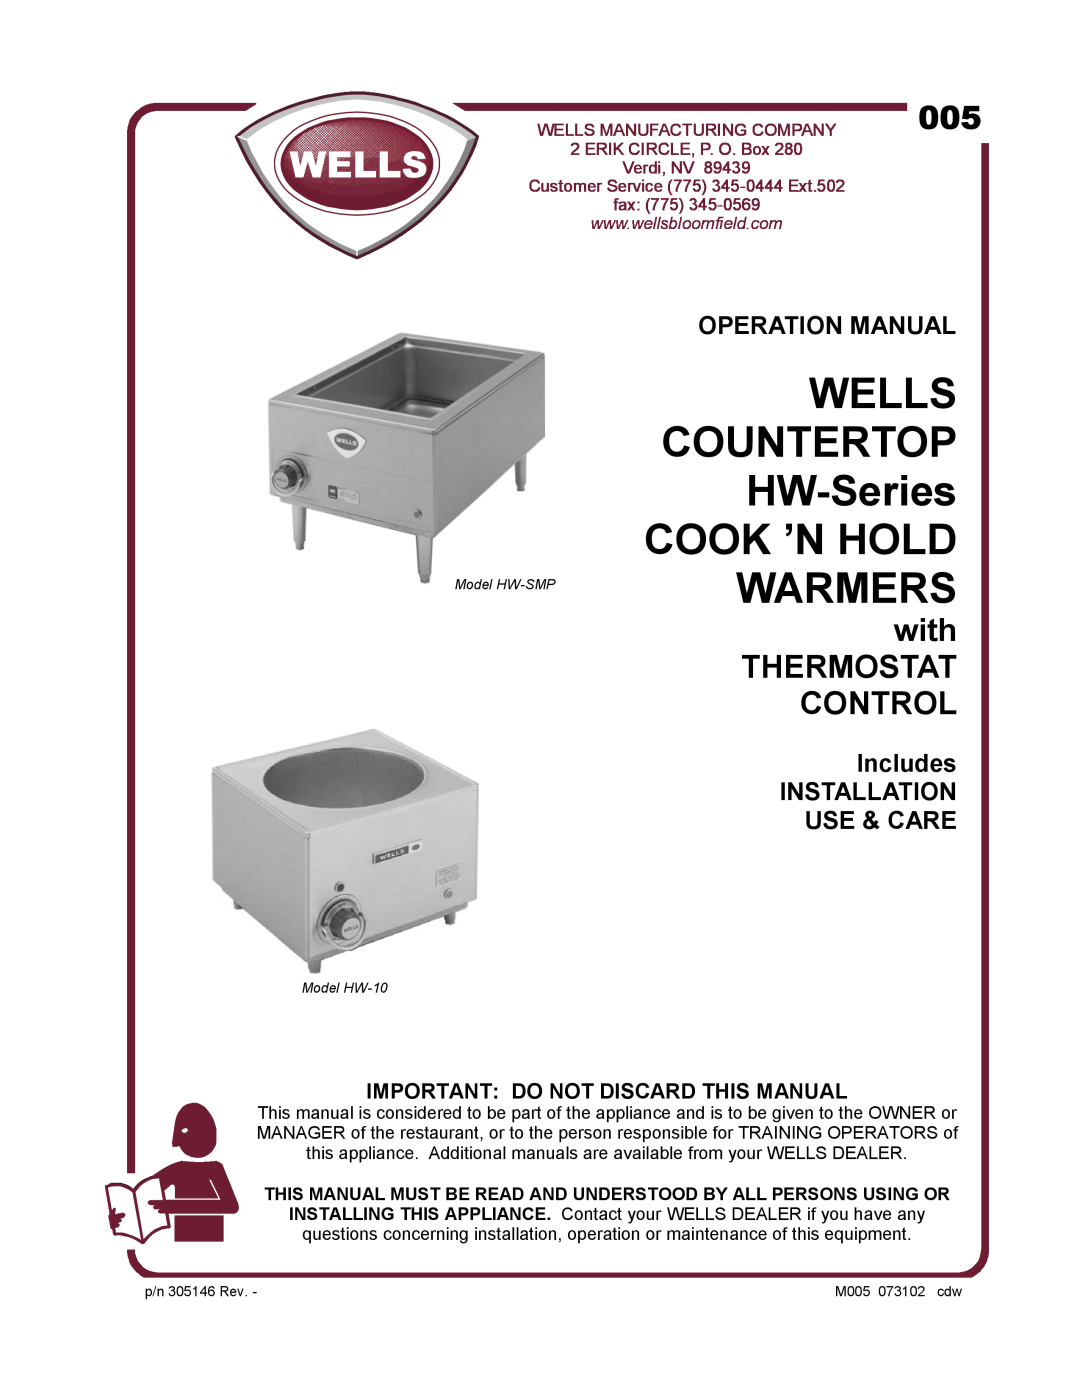 Wells HW-10 operation manual Includes INSTALLATION USE & CARE, Important Do Not Discard This Manual, Verdi, NV, Ext.502 